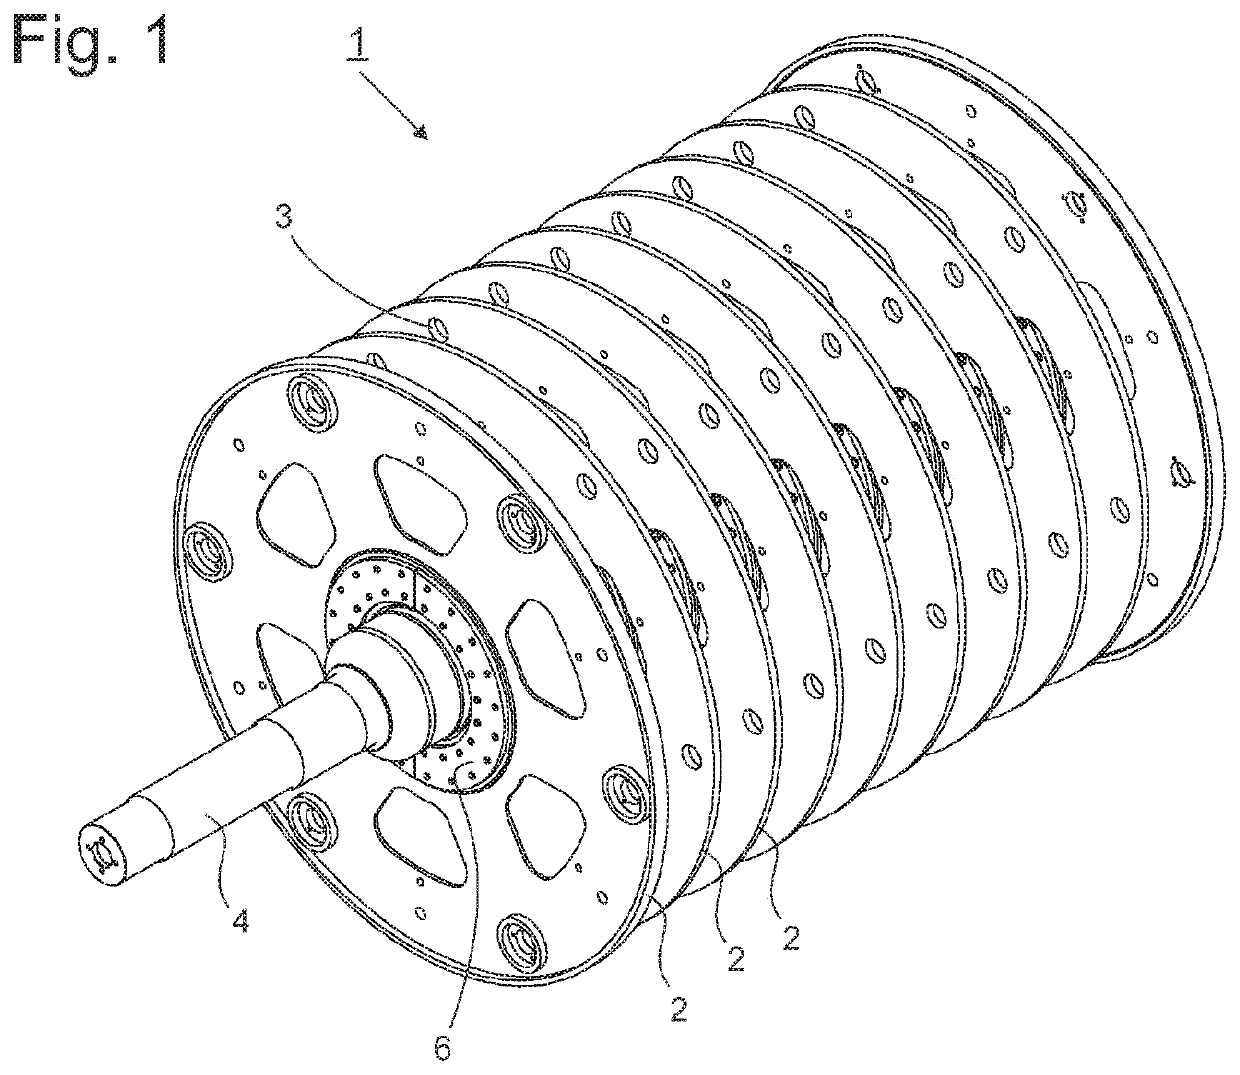 Rotor for a disintegration device